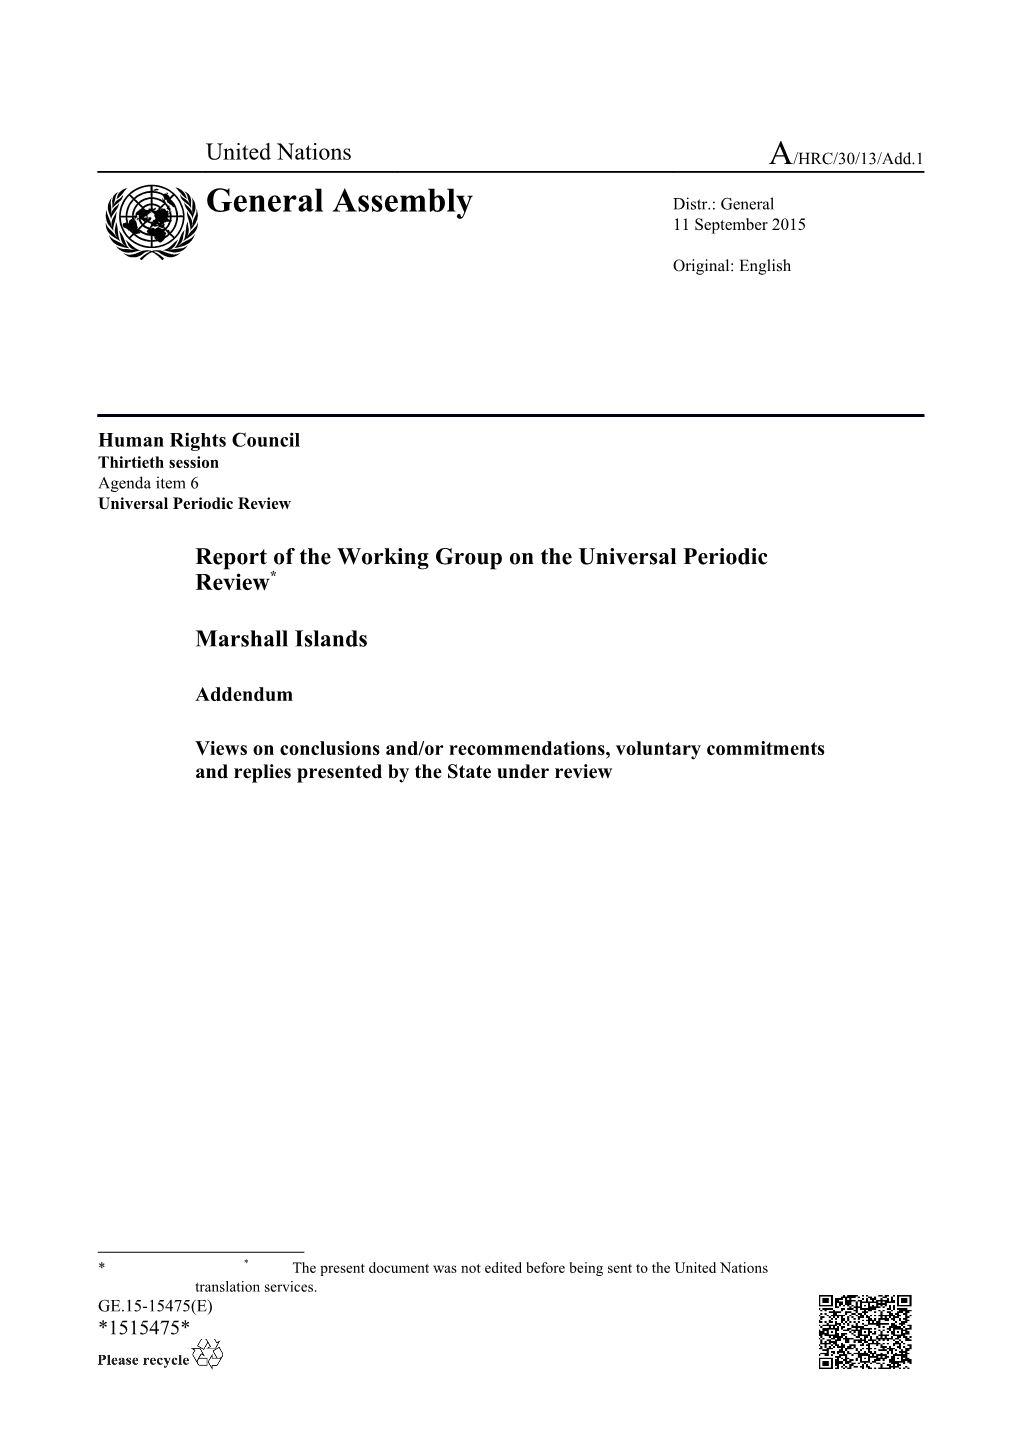 Addendum of the Report of the Working Group in English